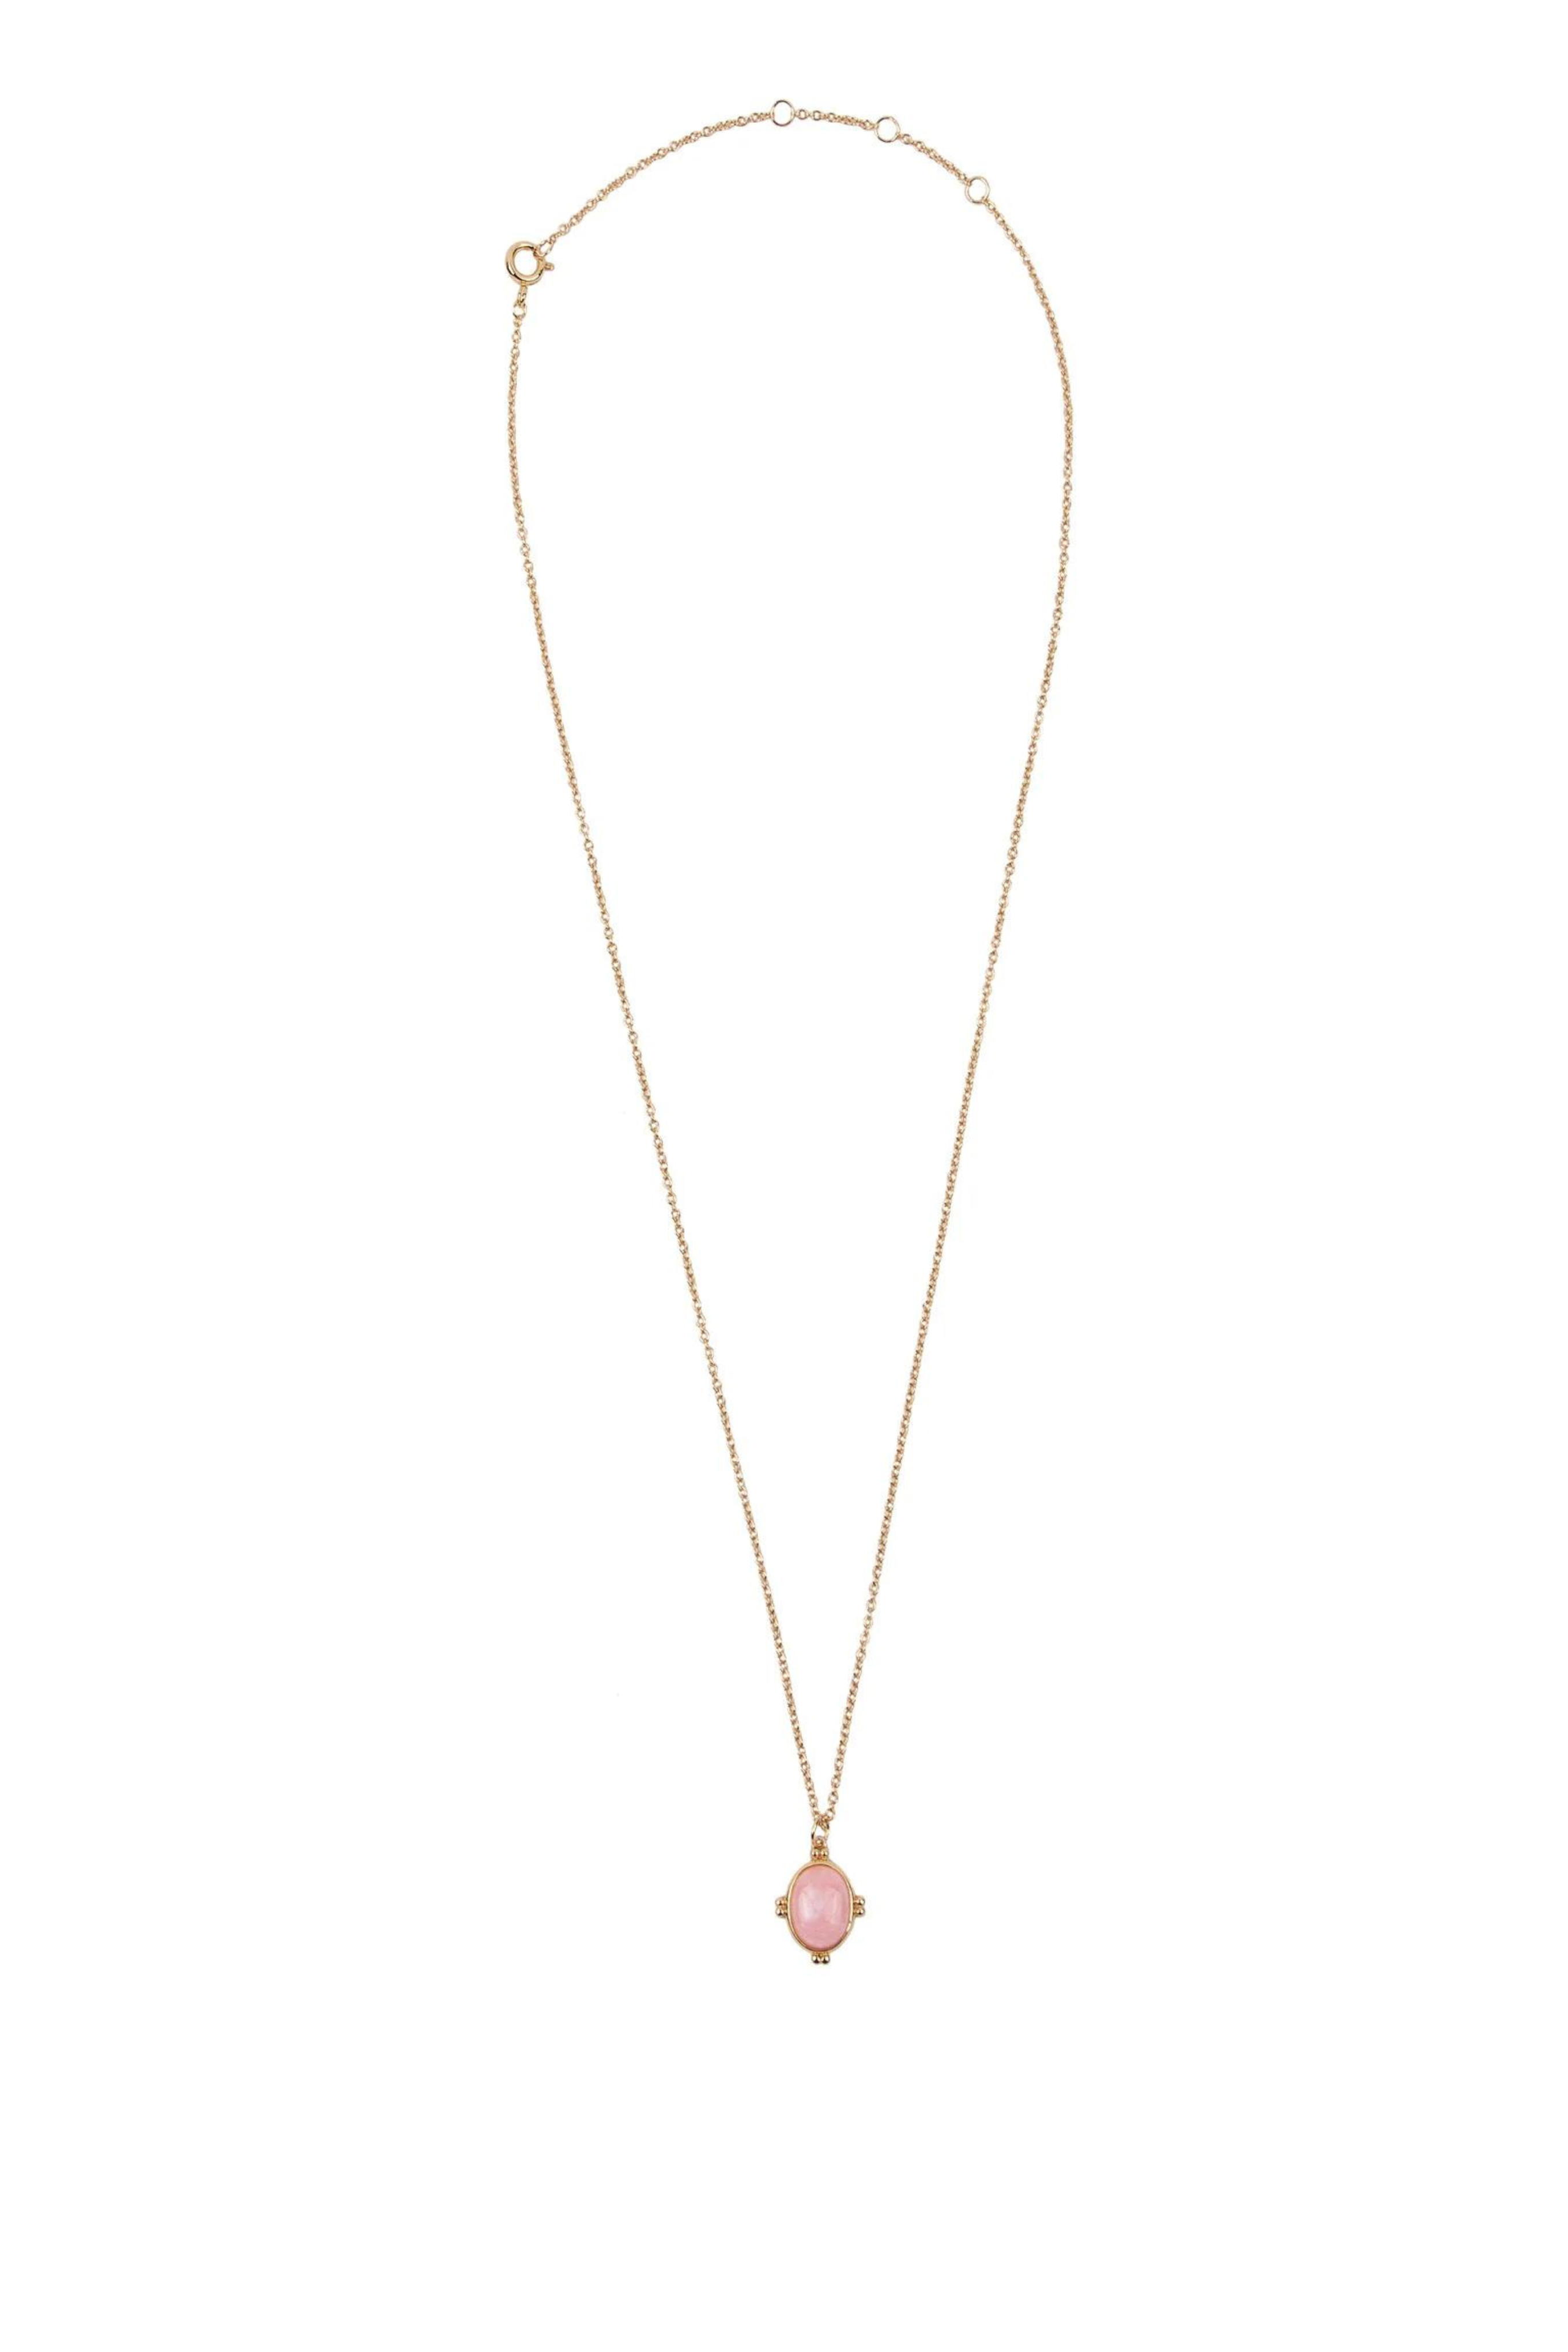 AMOUR MARBLE NECKLACE  - LIGHT PINK